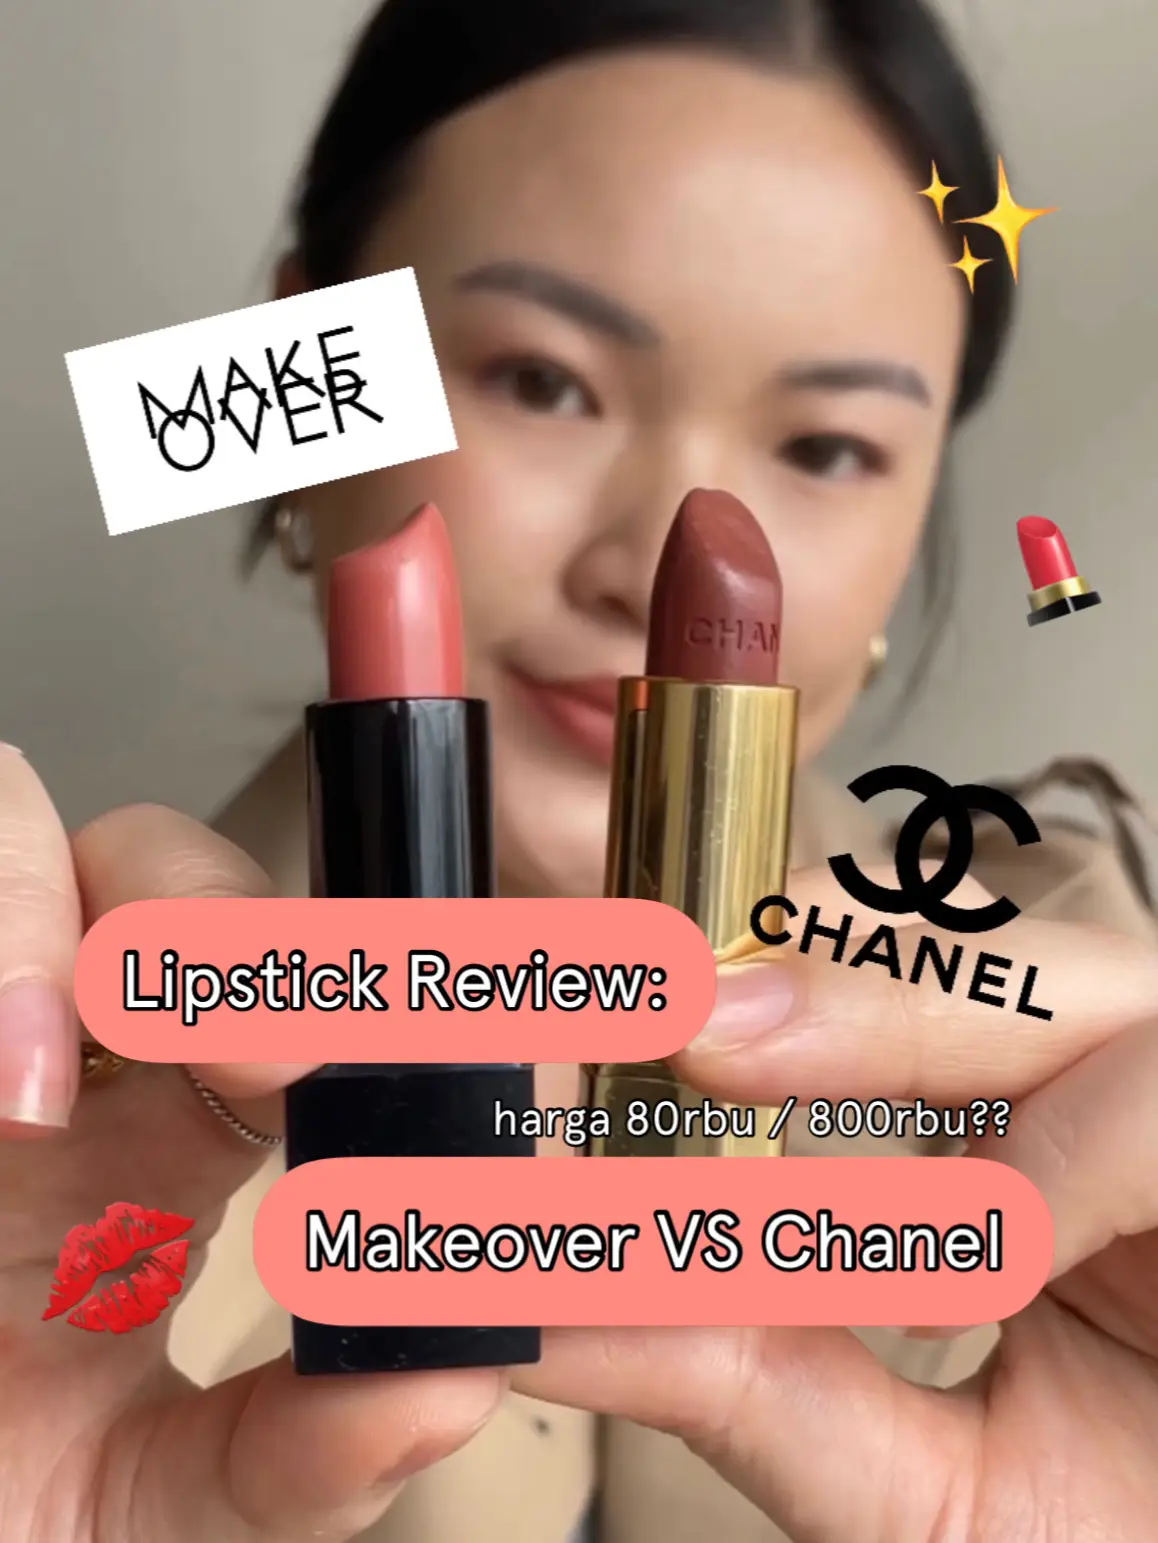 800rb @chanel.beauty lipstick vs 80rb @makeoverid lipstick💄Which one